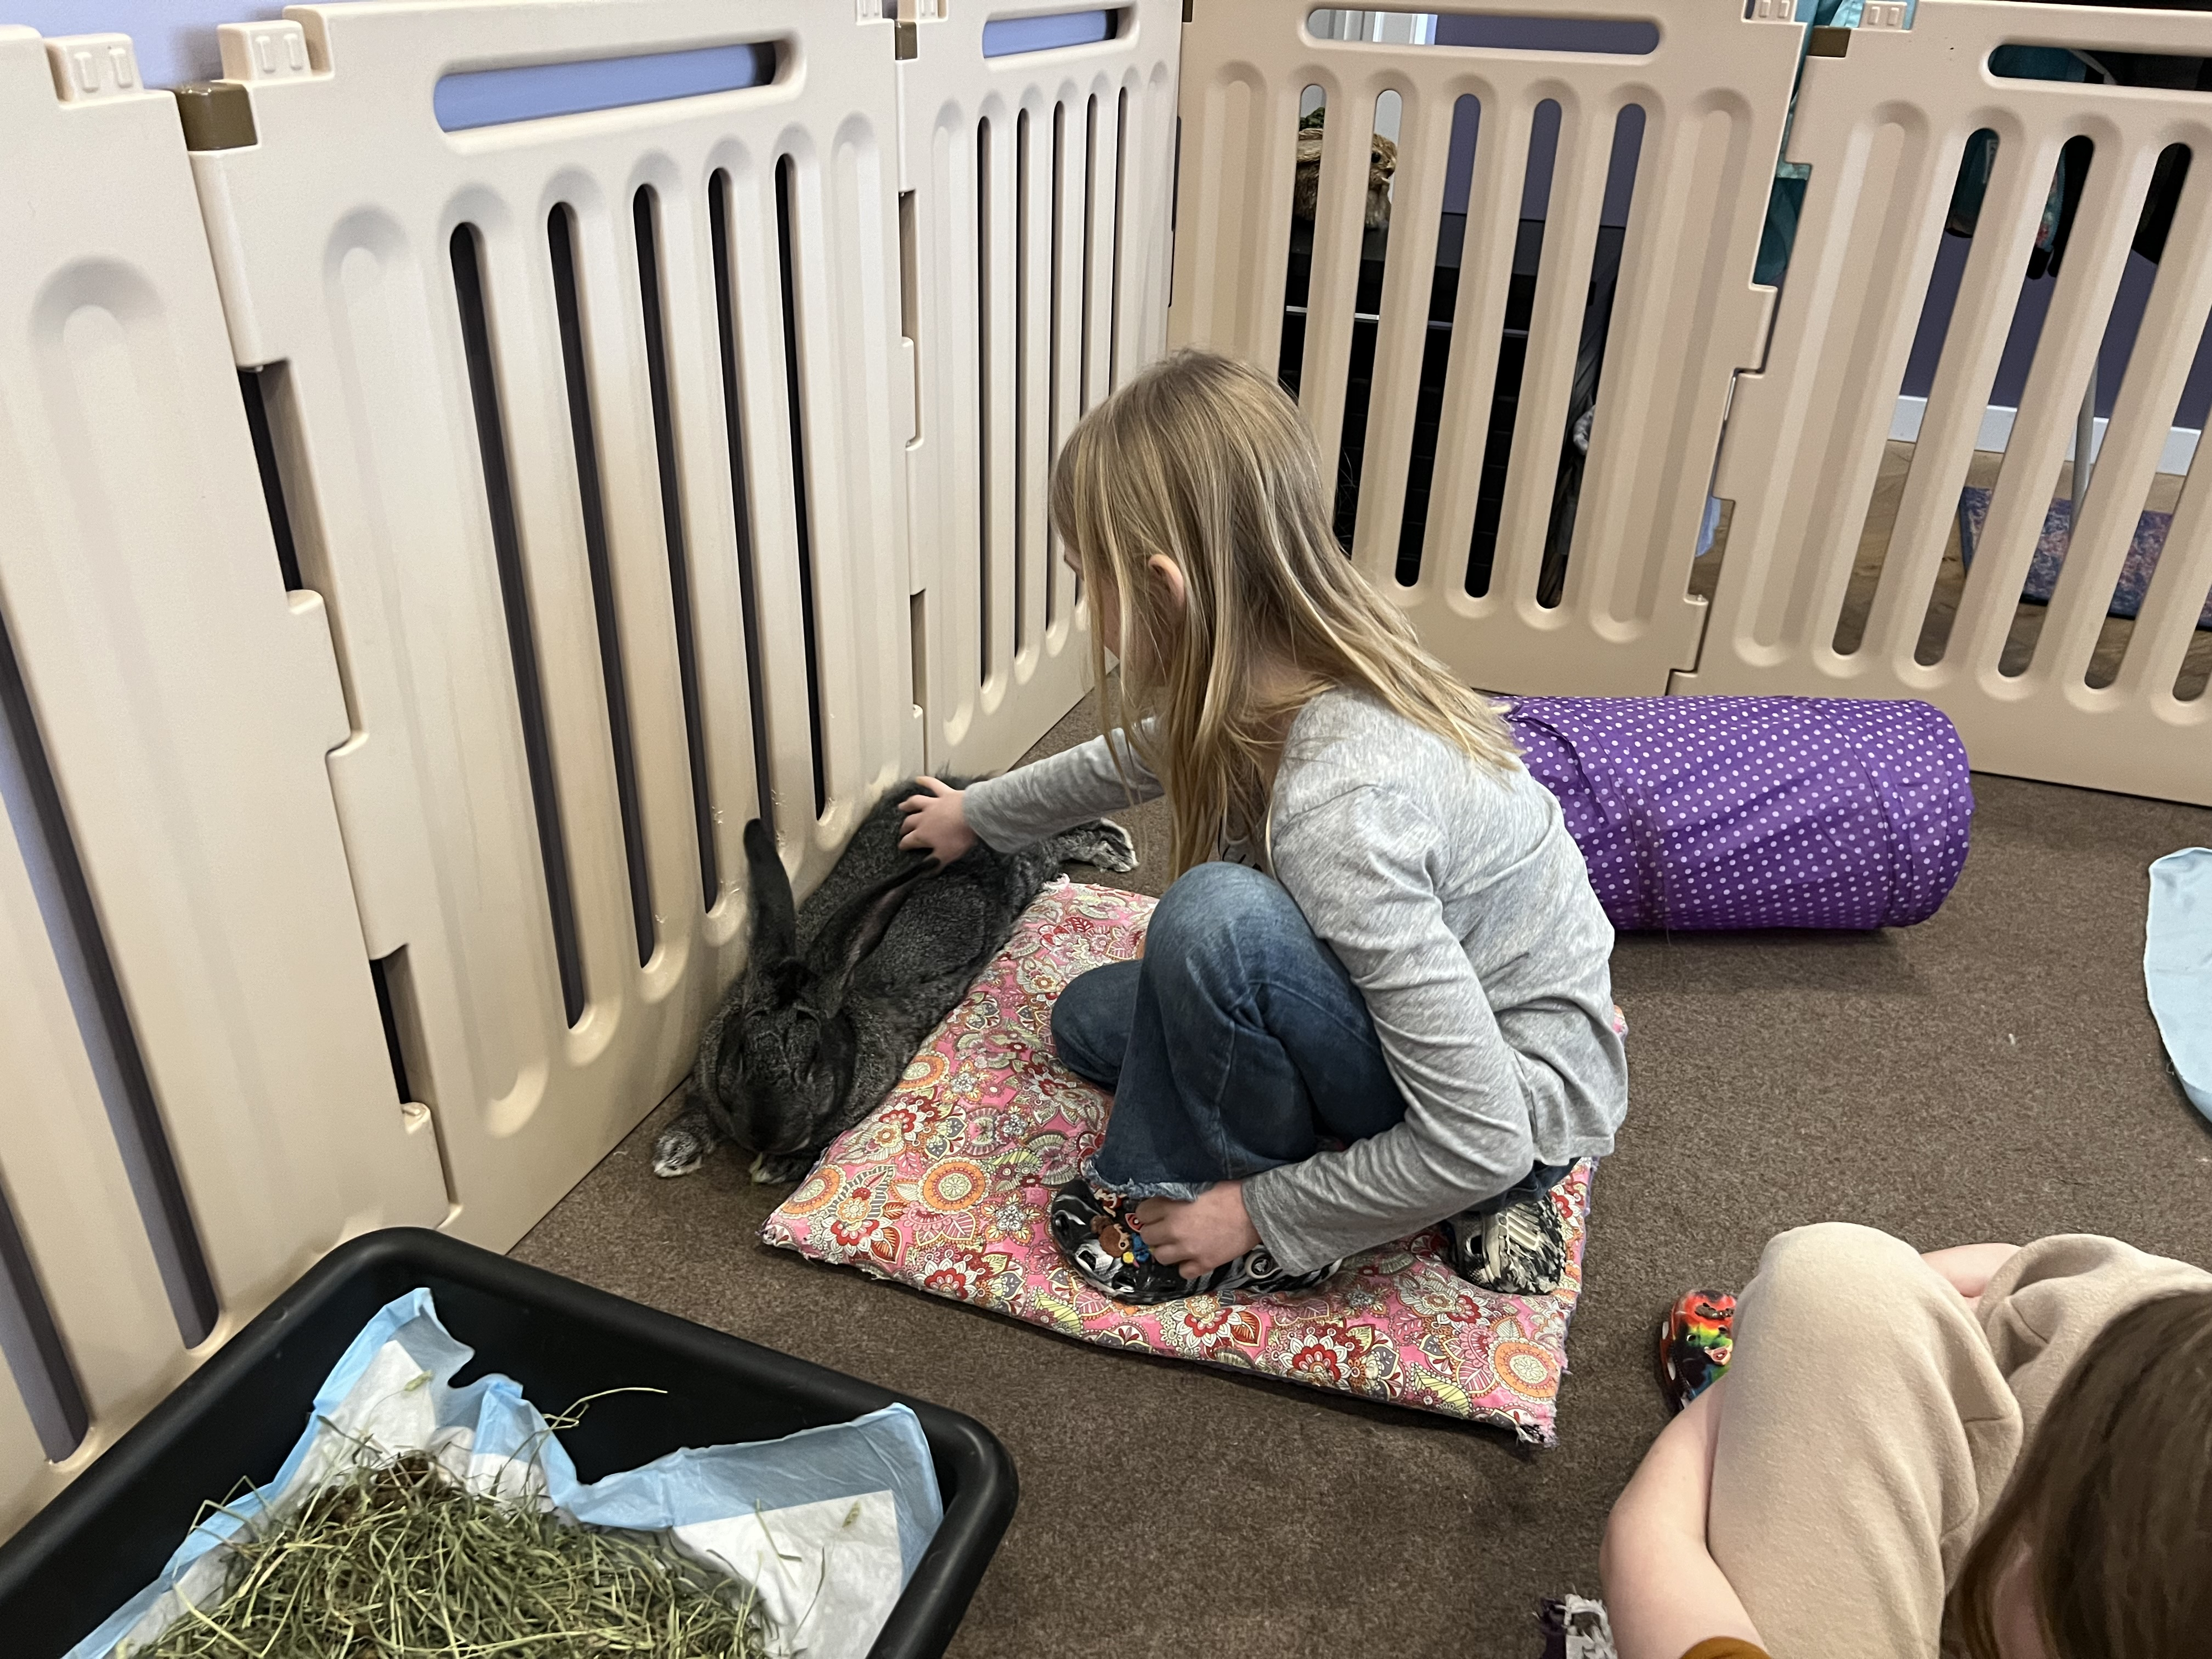 Therapeutic space allows visitors to relax and de-stress by cuddling  bunnies